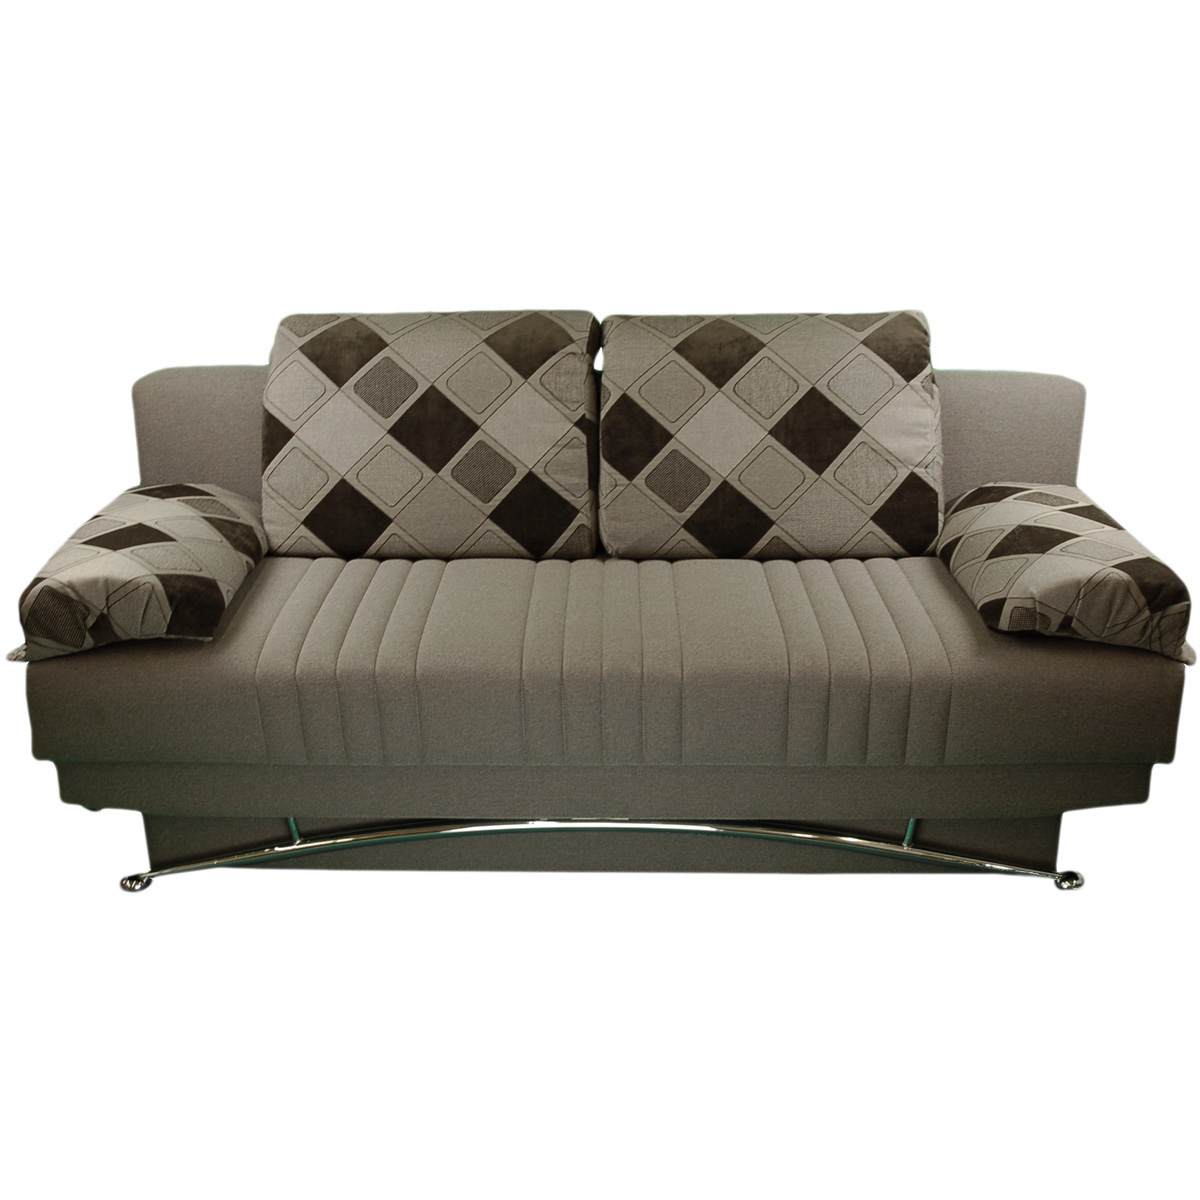 Fantasy Platin Light Brown with Design Pillows Sofa Bed by Istikbal  Furniture